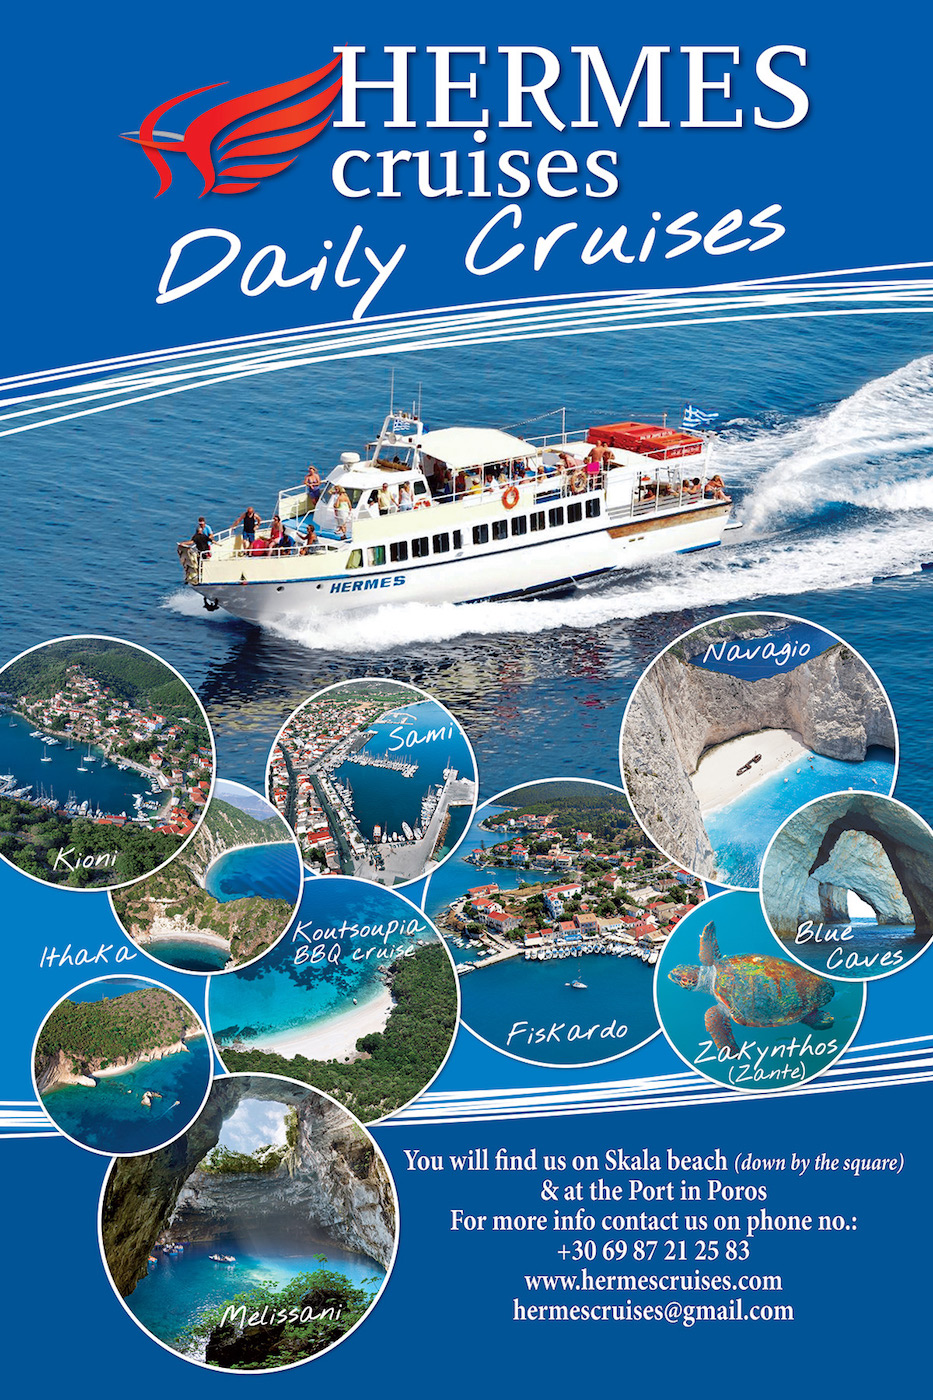 Welcome to Hermes Cruises Kefalonia - Book now a perfect Kefalonia day cruise. Enjoy the beauty of Ionian Sea! Kefalonia Daily Cruises to Ithaca - Kefalonia Daily Cruises to Zakynthos - Kefalonia Boat Cruises - Kefalonia Sea Excursions - Kefalonia Boat Tours - Hermes Cruises Kefalonia - Boat Cruises Kefalonia